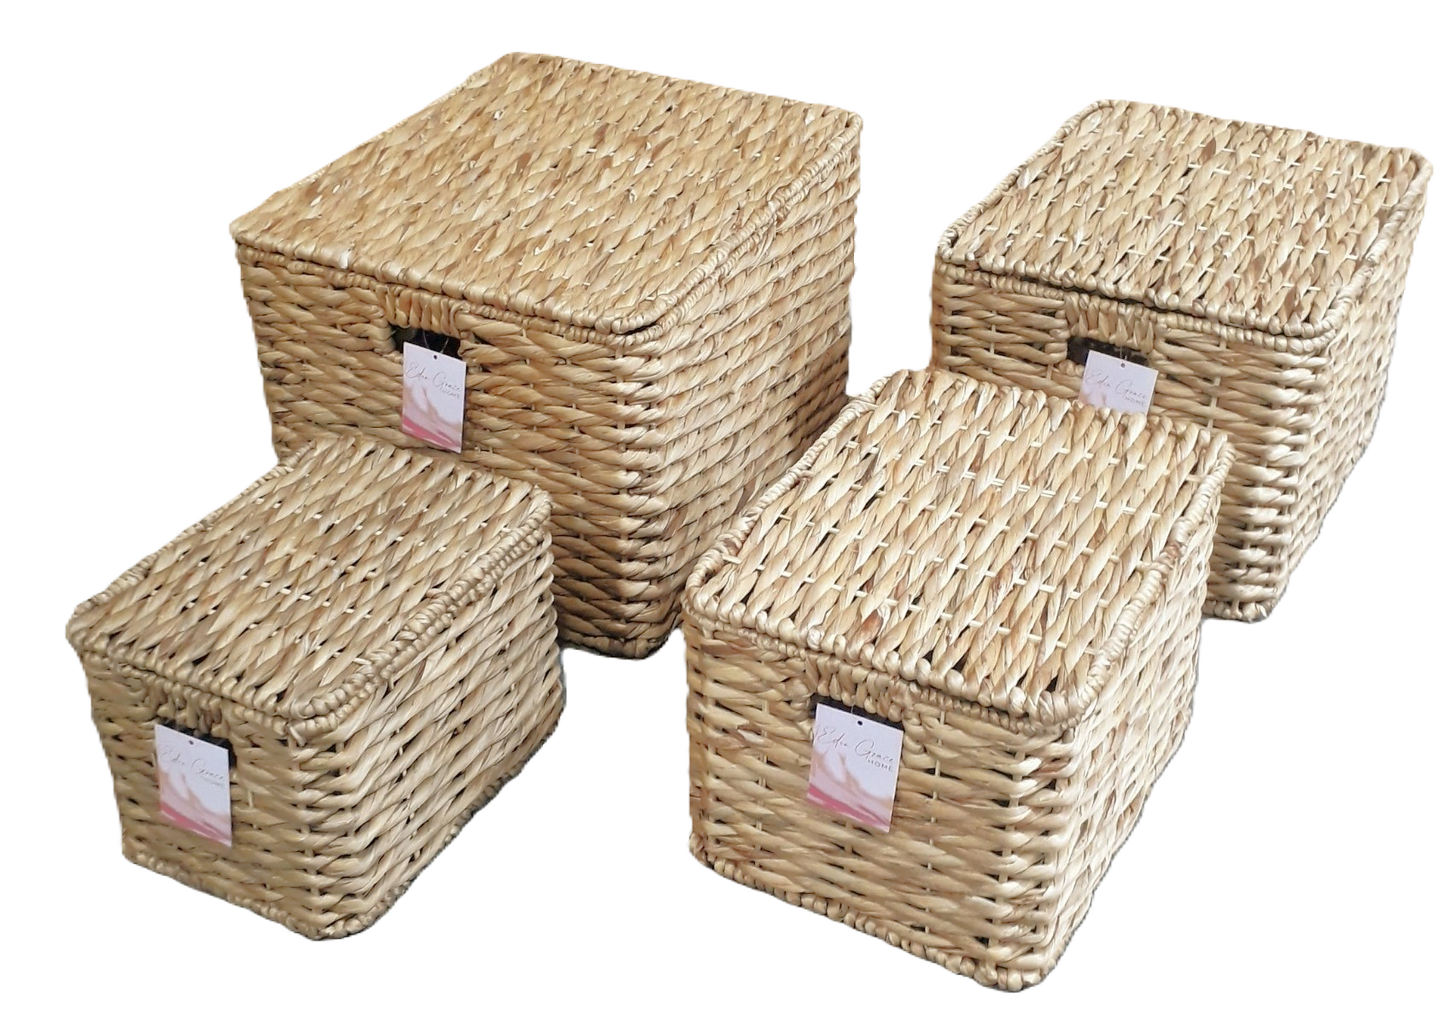 Eden Grace Set of 4 Hand-Woven Wicker Storage Trunks with Twisted Weave and Iron Frame